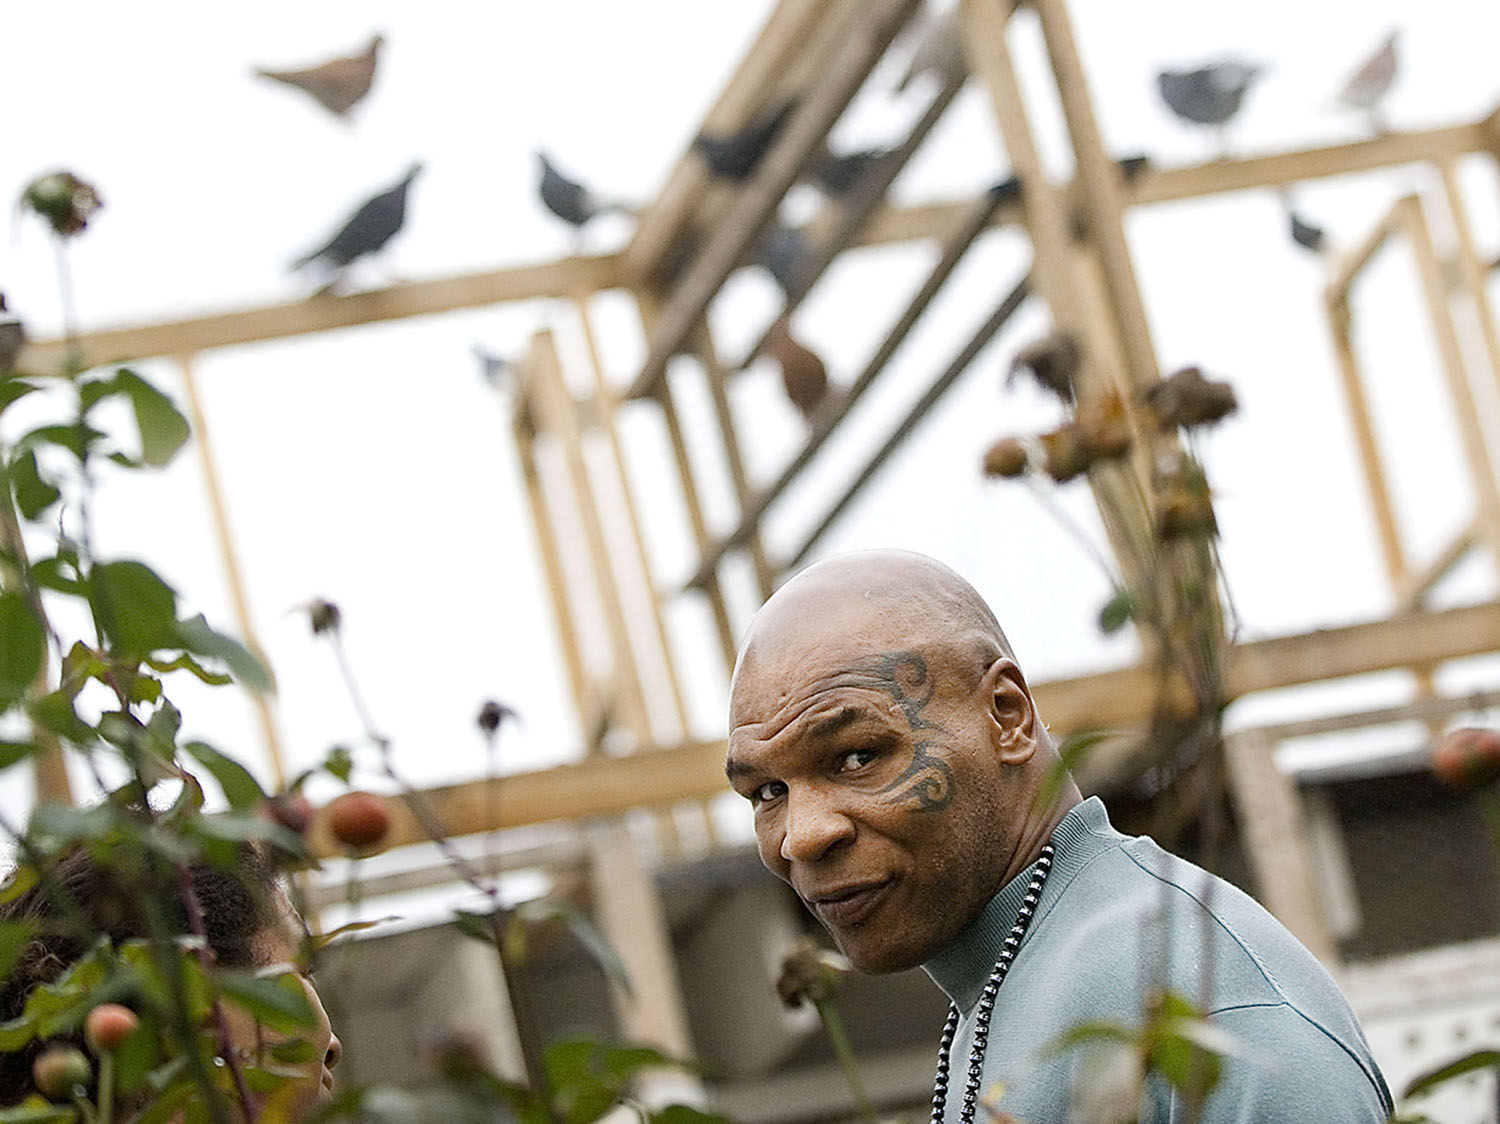  Former heavyweight boxing champion Mike Tyson being interviewed about his upcoming reality TV show on Animal Planet, {quote}Taking on Tyson,{quote} at Tyson's Corner, the coop for his racing pigeons, behind the Ringside Lounge which is owned by his long-time friend, Mario Costa. (Reena Rose Sibayan | The Jersey Journal)